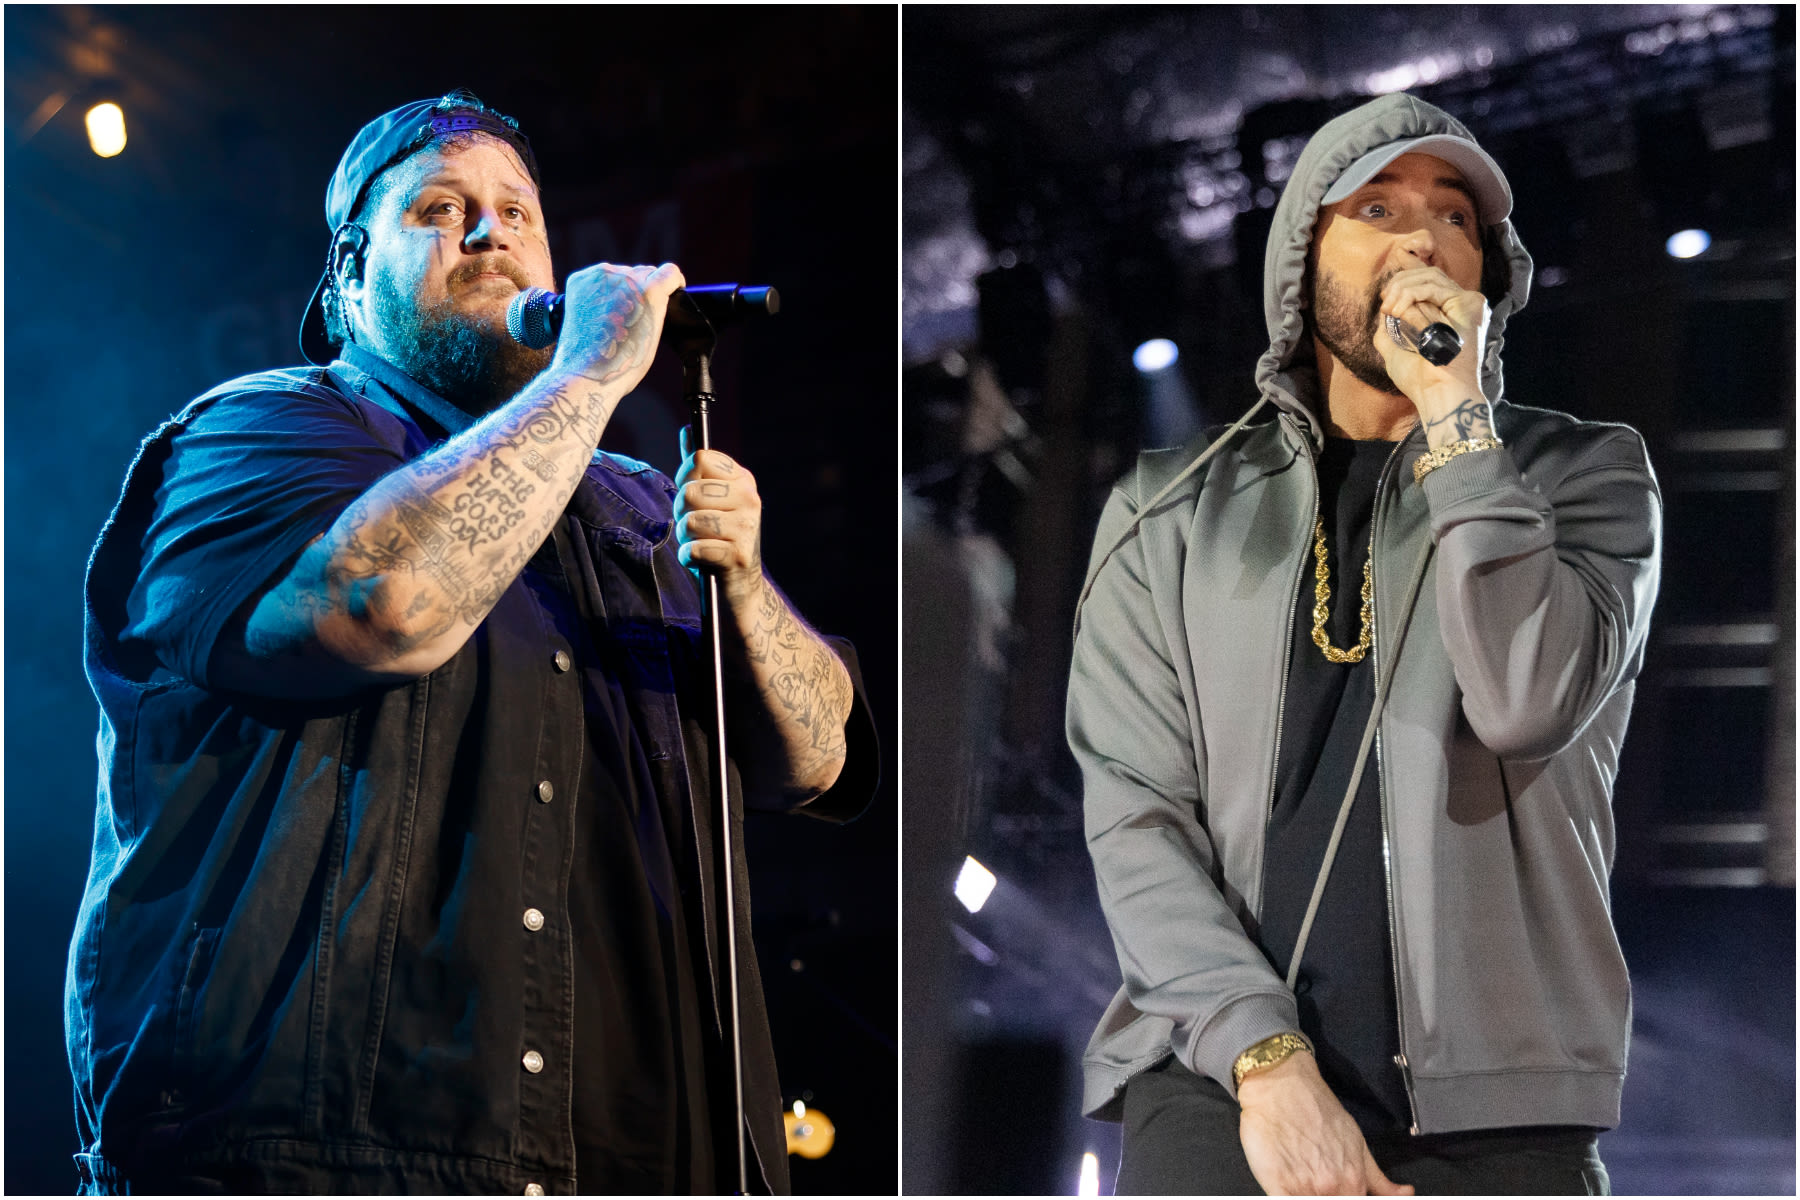 Jelly Roll Calls Eminem ‘Childhood Hero’ After Release of ‘Somebody Save Me’ Collaboration